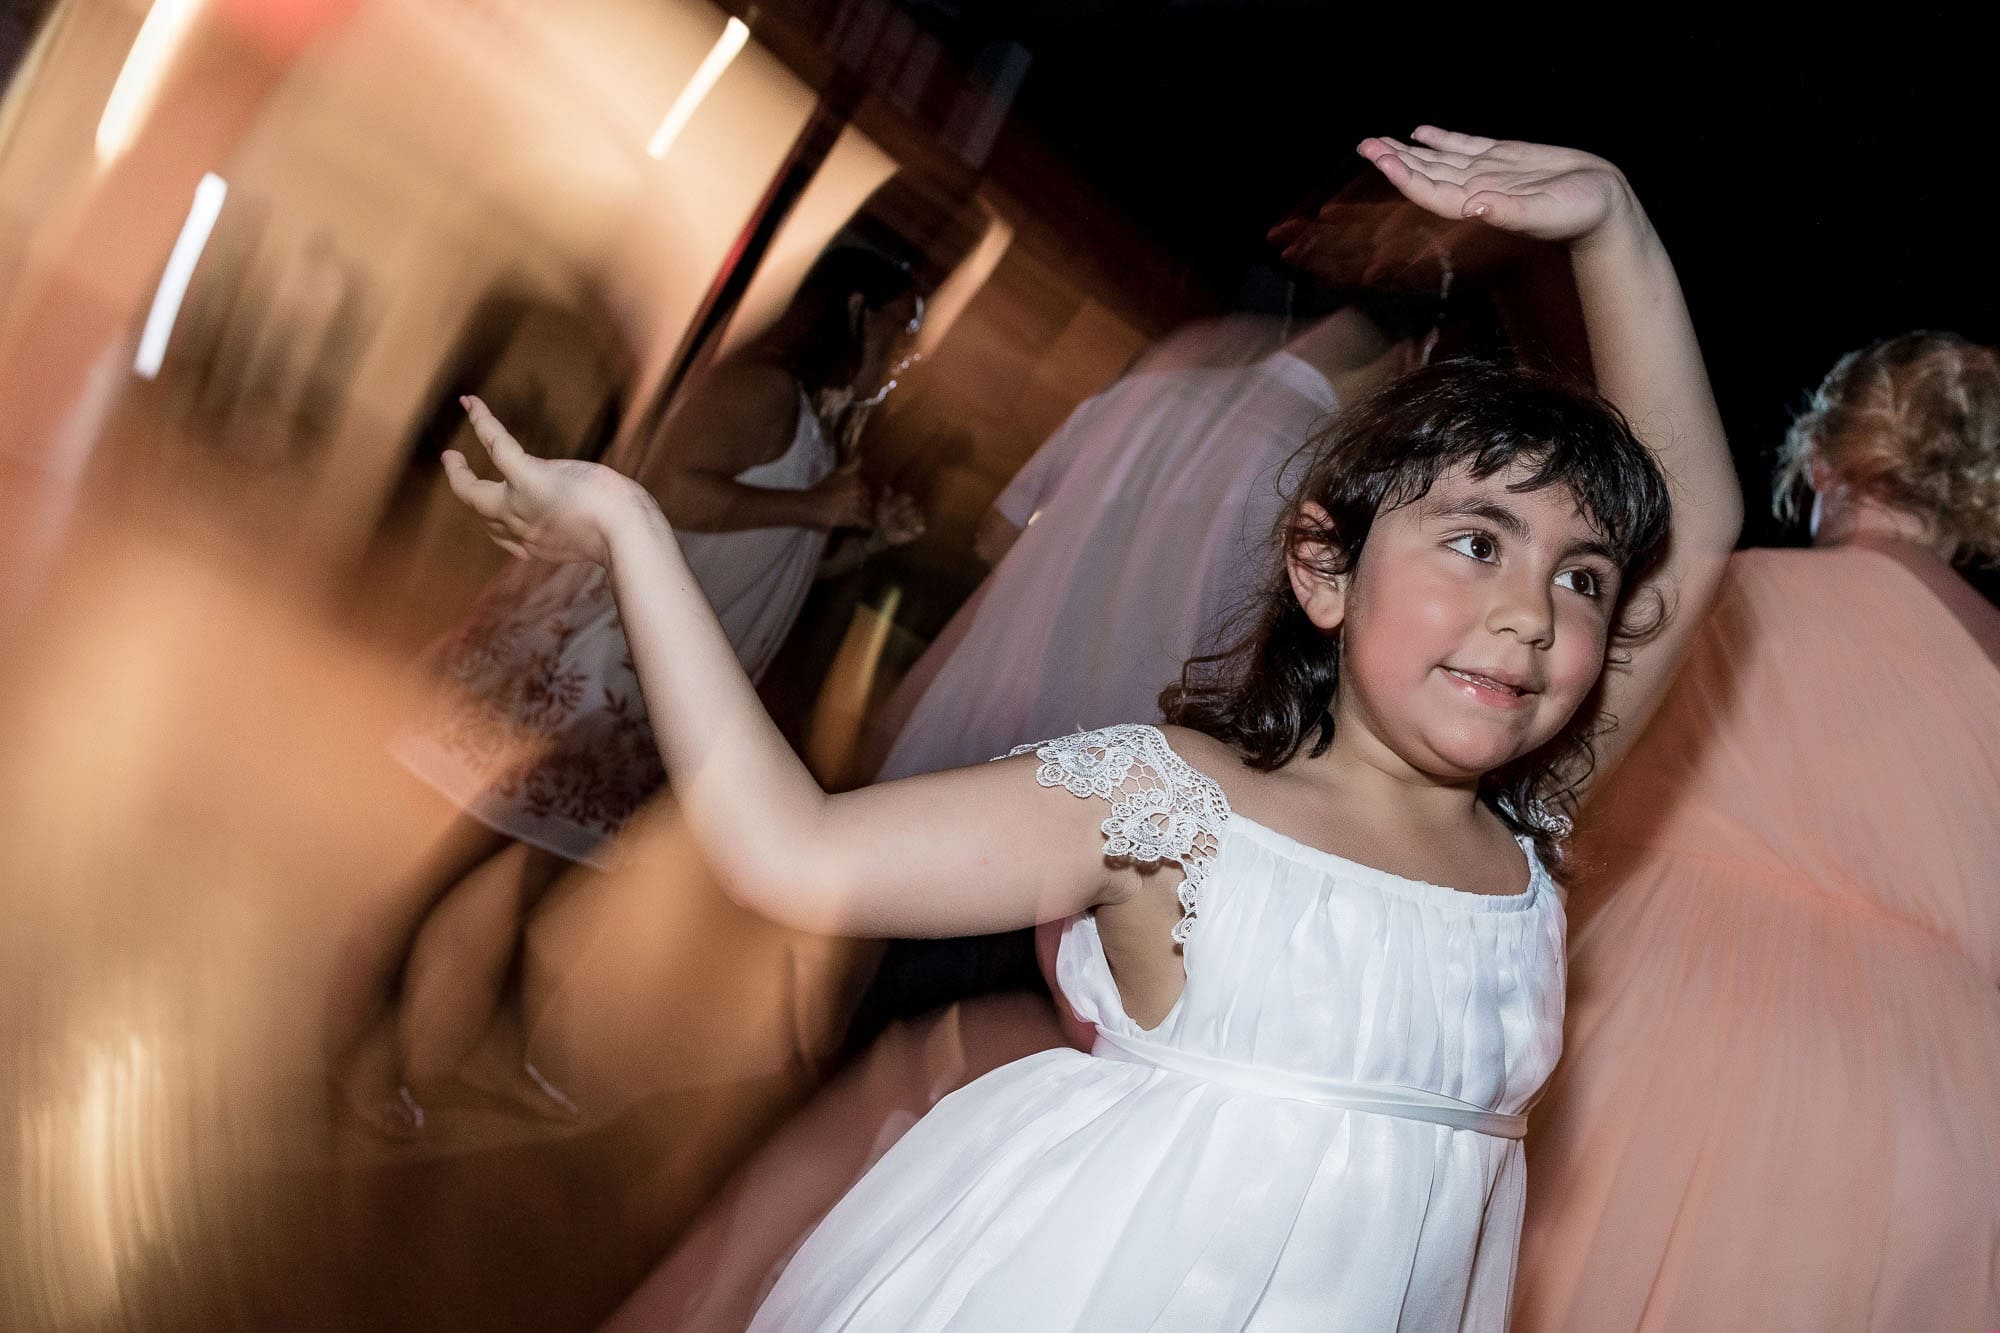 The flower girl showing off her dance moves